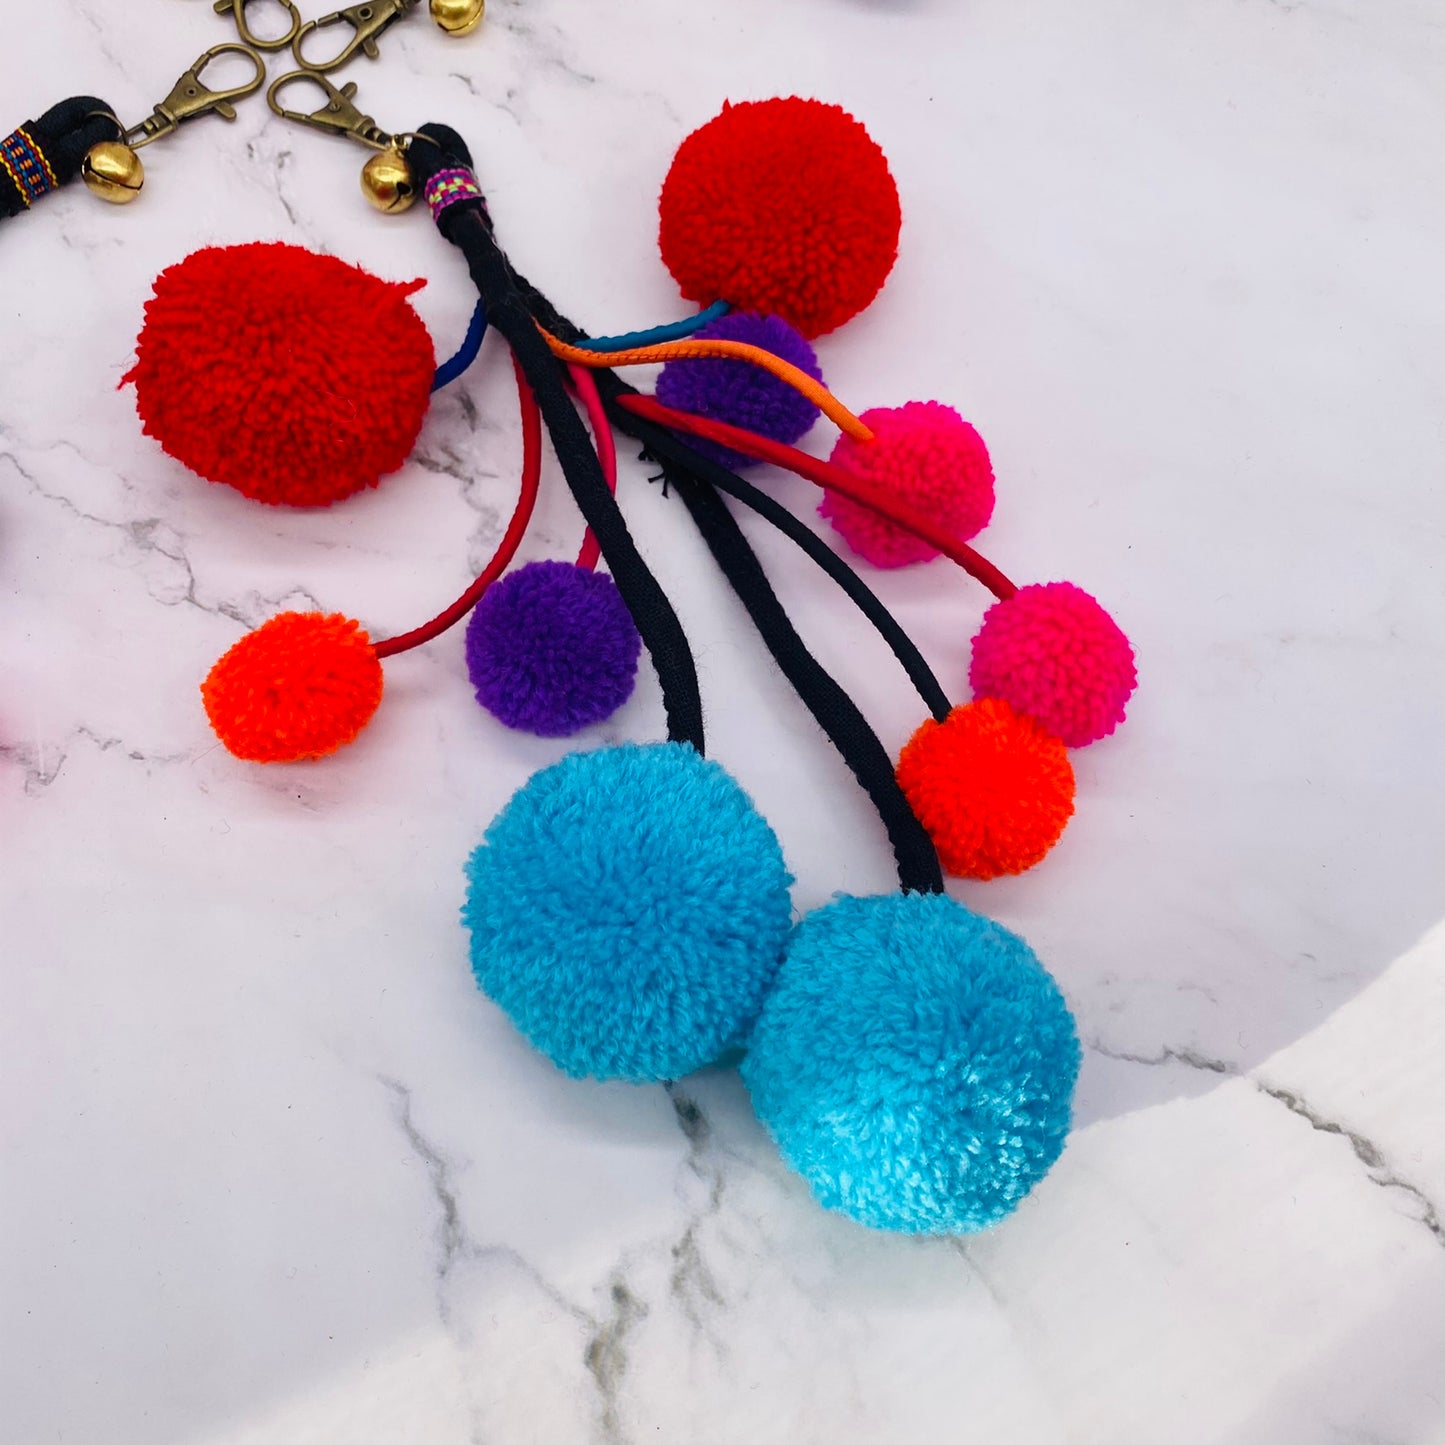 Pom Pom Keychain, Colorful Keychain, Handmade Keychain, Bag Accessories, Gift For Her, Soft Bag Hanging, Cute Key ring, Bag Charm